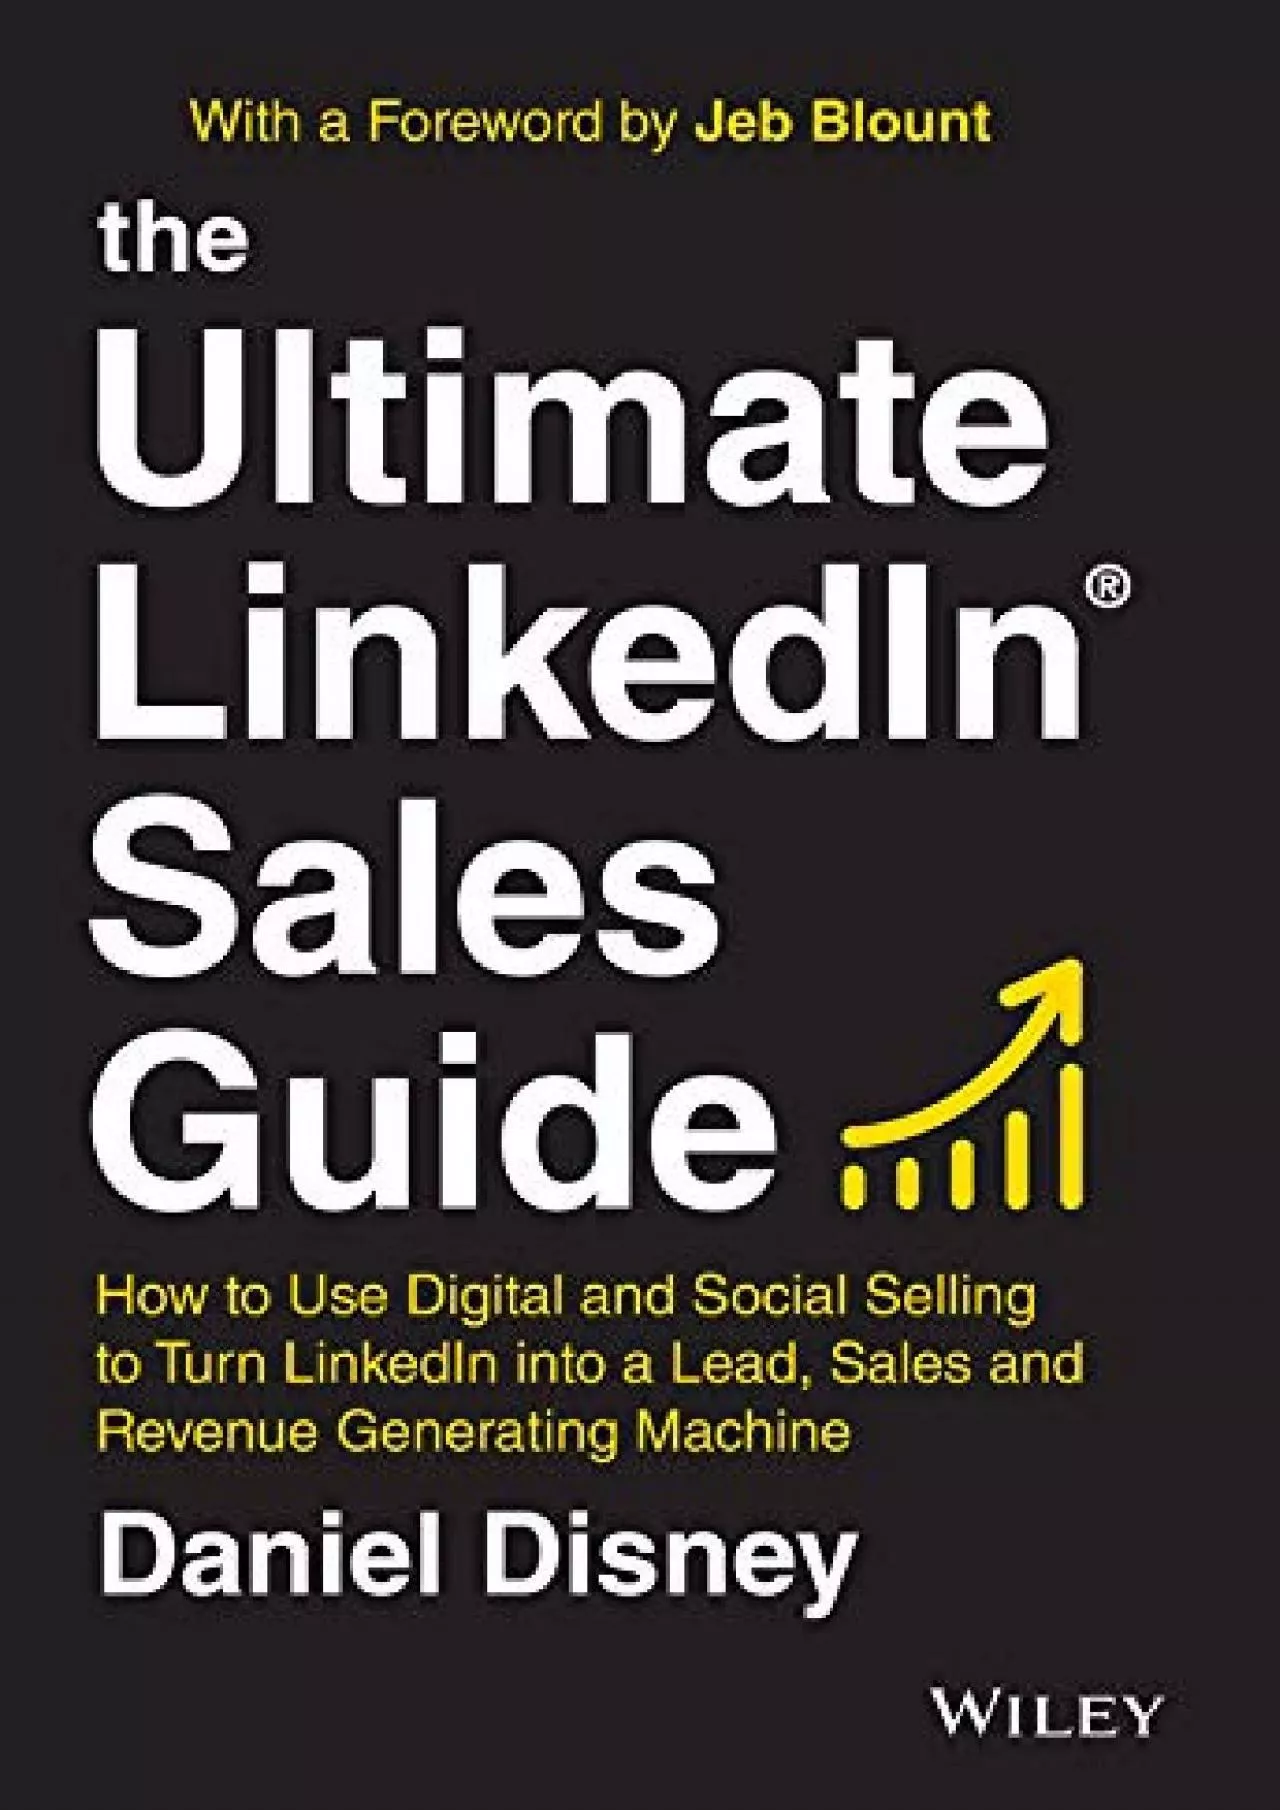 The Ultimate LinkedIn Sales Guide: How to Use Digital and Social Selling to Turn LinkedIn